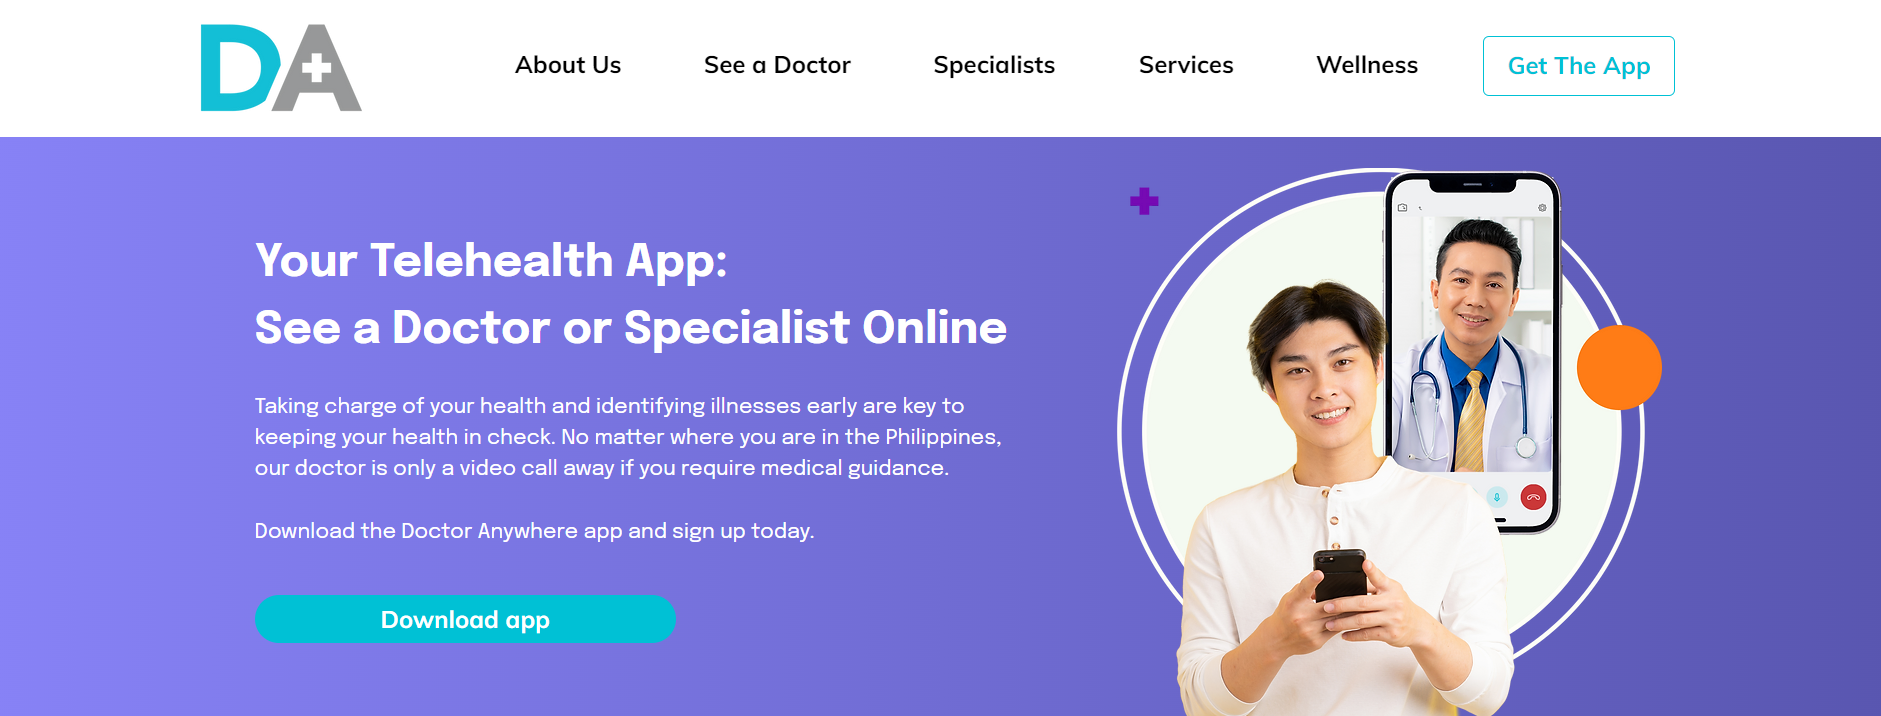 online medical consultation philippines - doctor anywhere